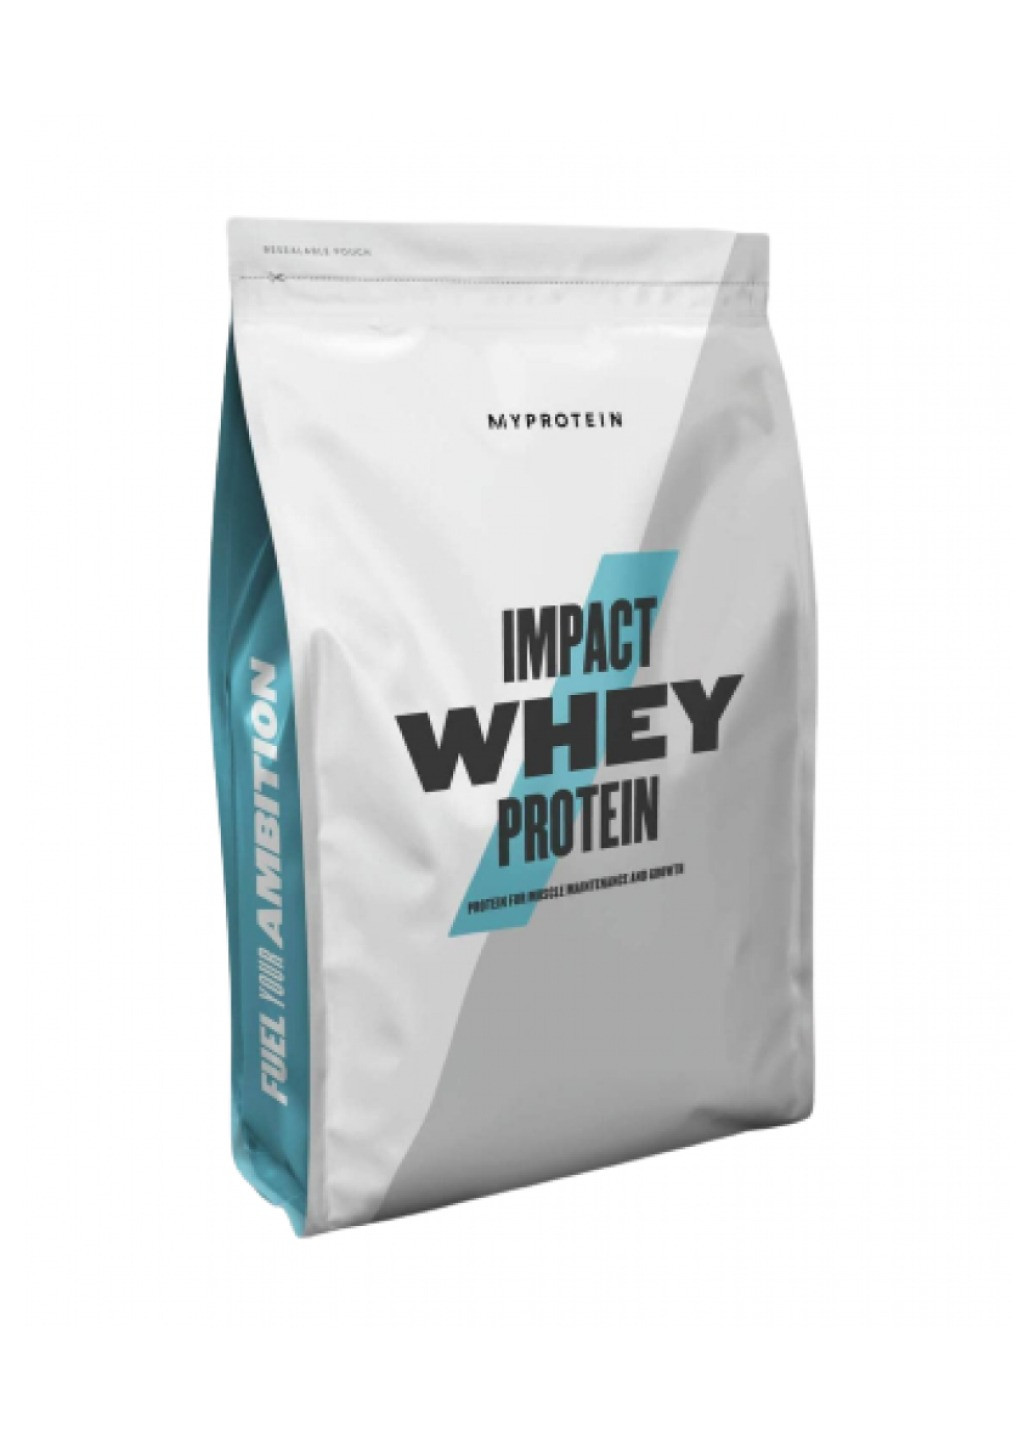 Протеин концентрат Impact Whey Protein - 5000g Unflavoured My Protein (258463145)